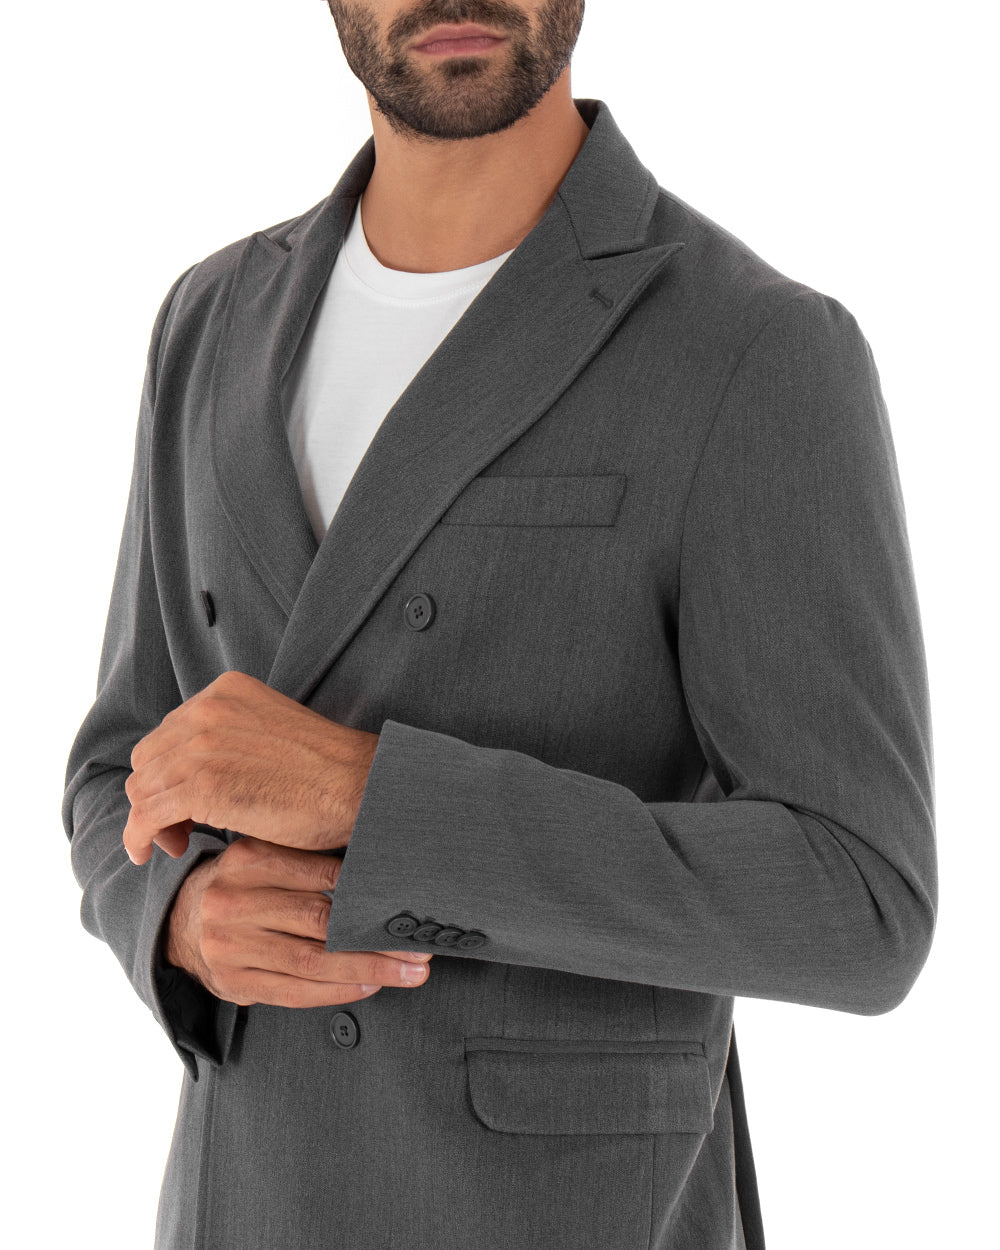 Double-breasted Men's Suit Gray Viscose Tailored Jacket Trousers Elegant Casual GIOSAL-OU2086A